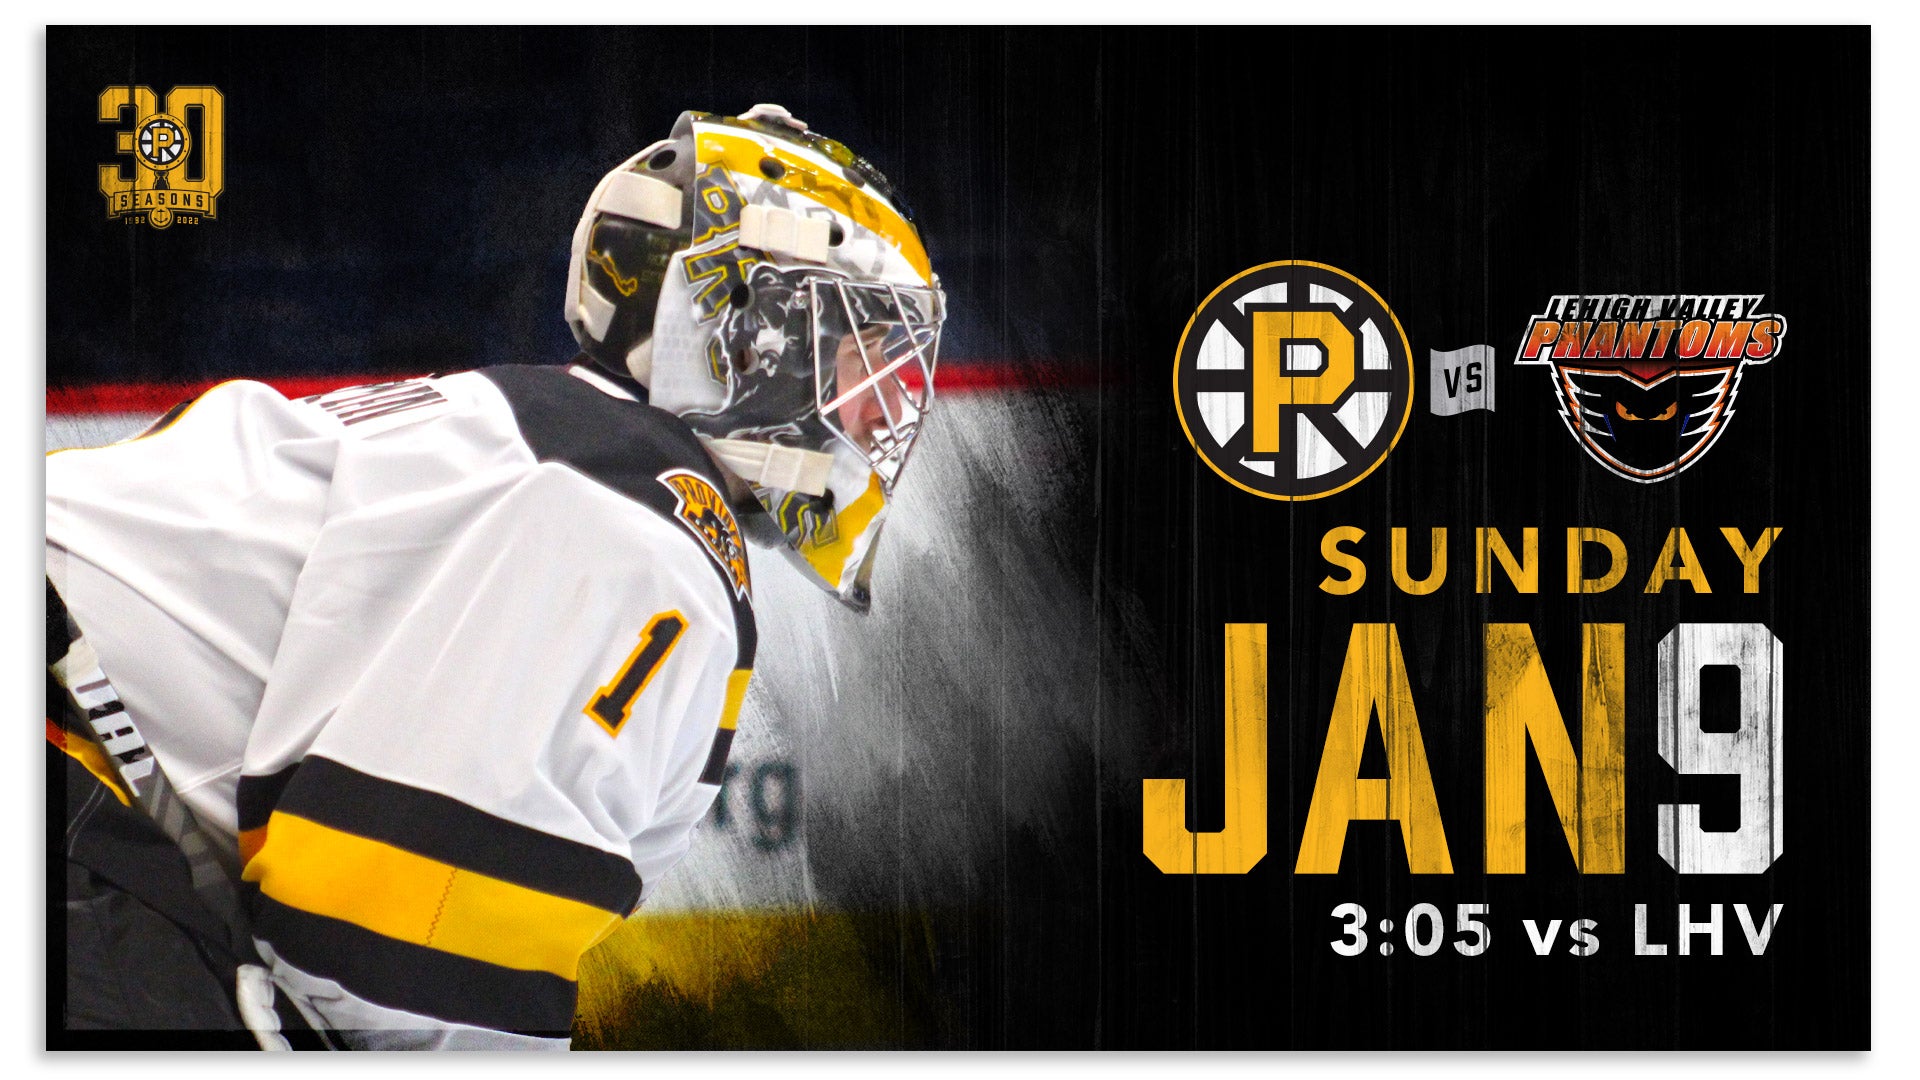 Providence Bruins 2122 Schedule